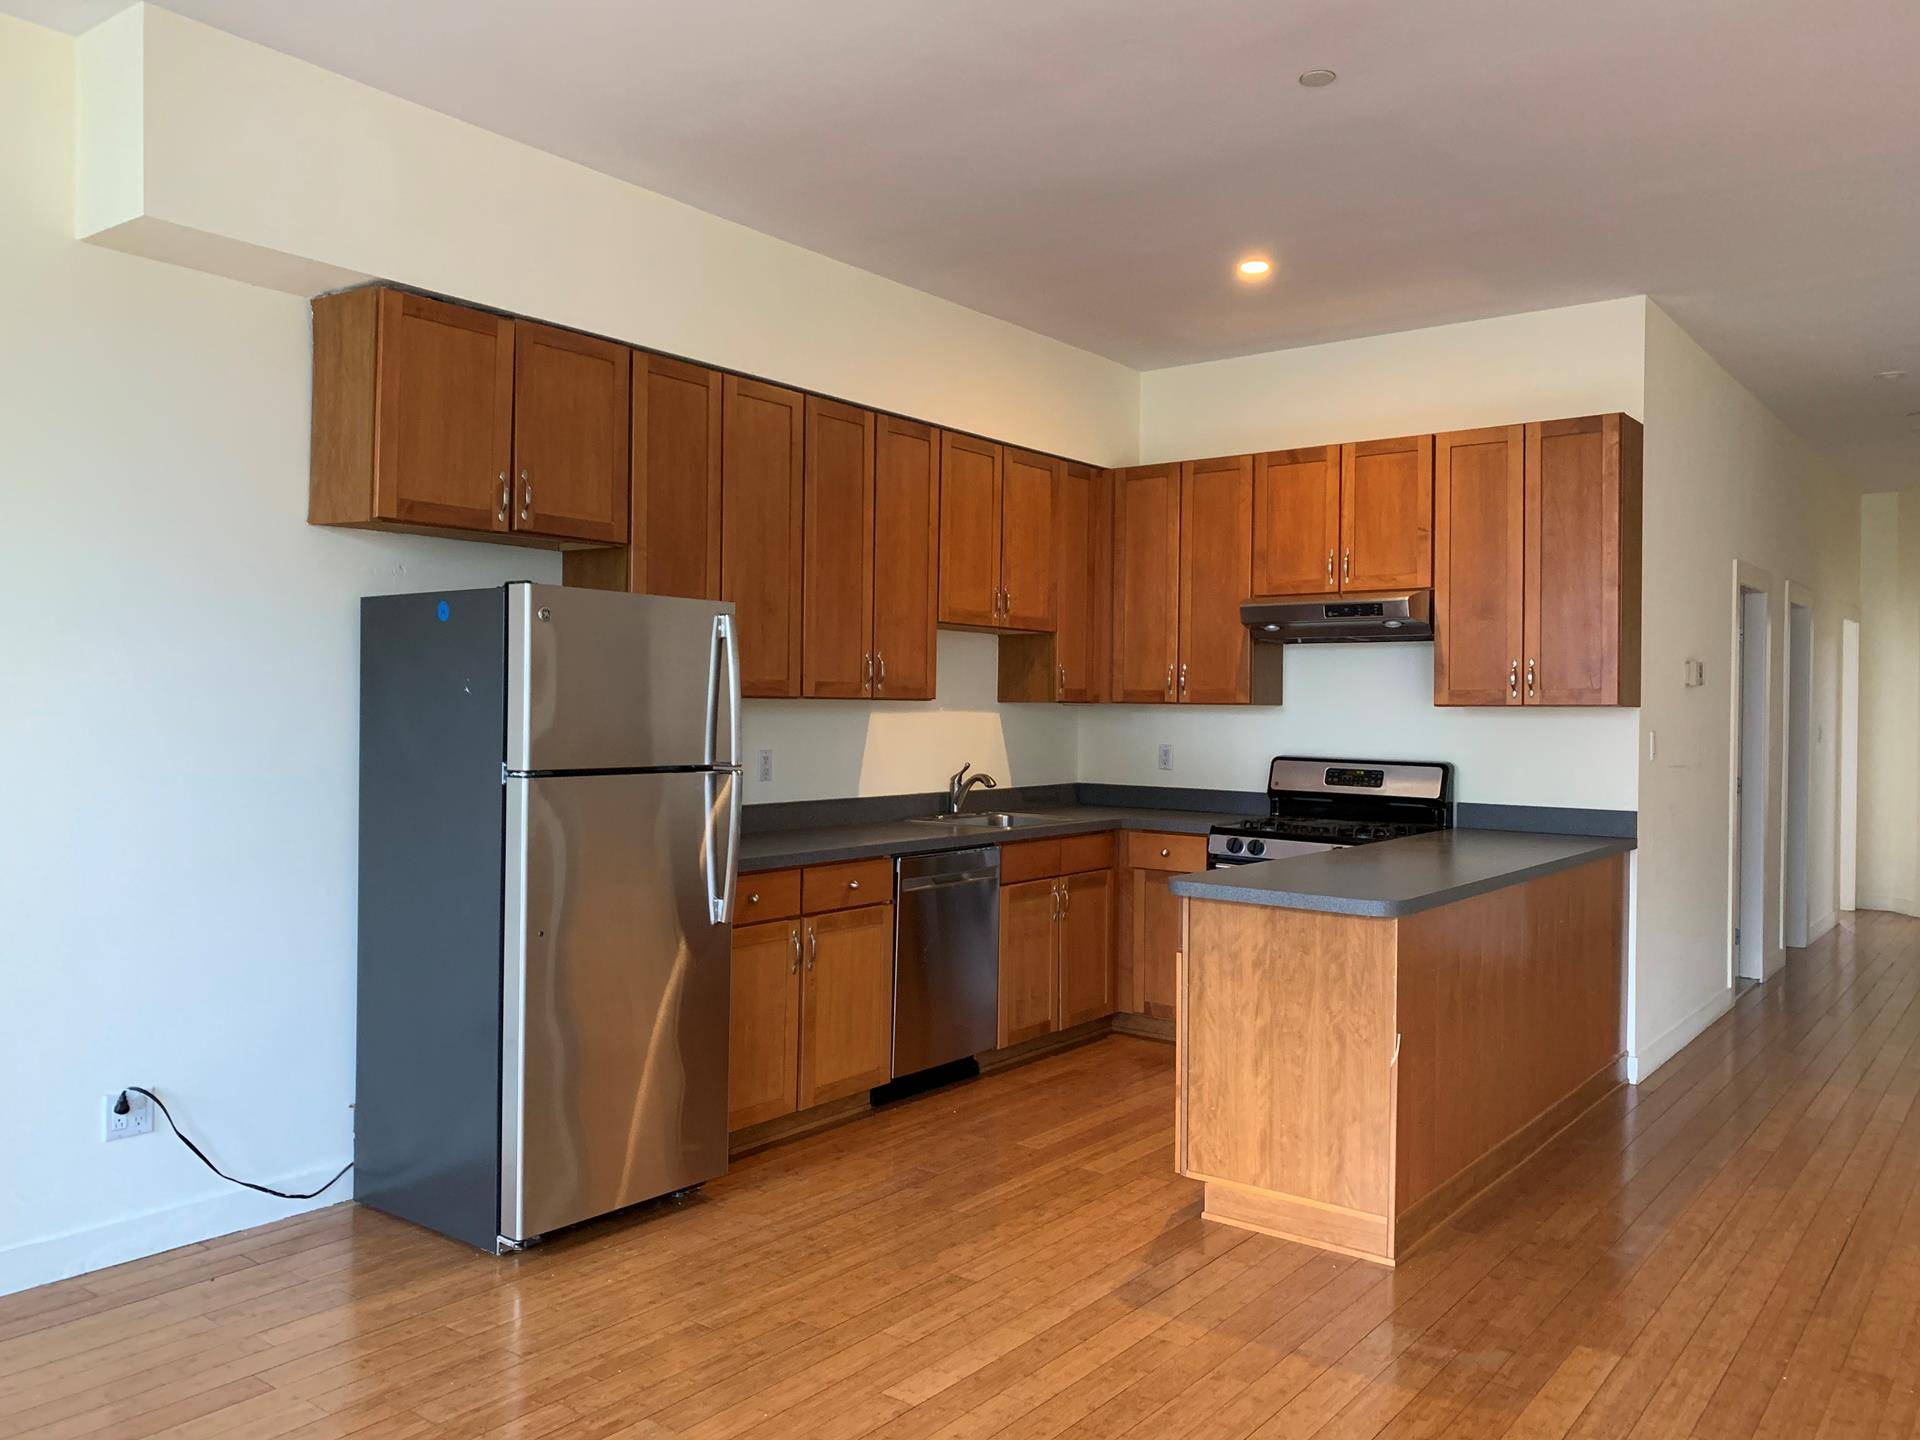 Available Immediately Virtual Tours AvailableLocated in the heart of Hunters Point, this walk up 3rd floor 2 bedroom residence boasts nearly 1, 200 SF and features 11' ceilings, generous closet, ...